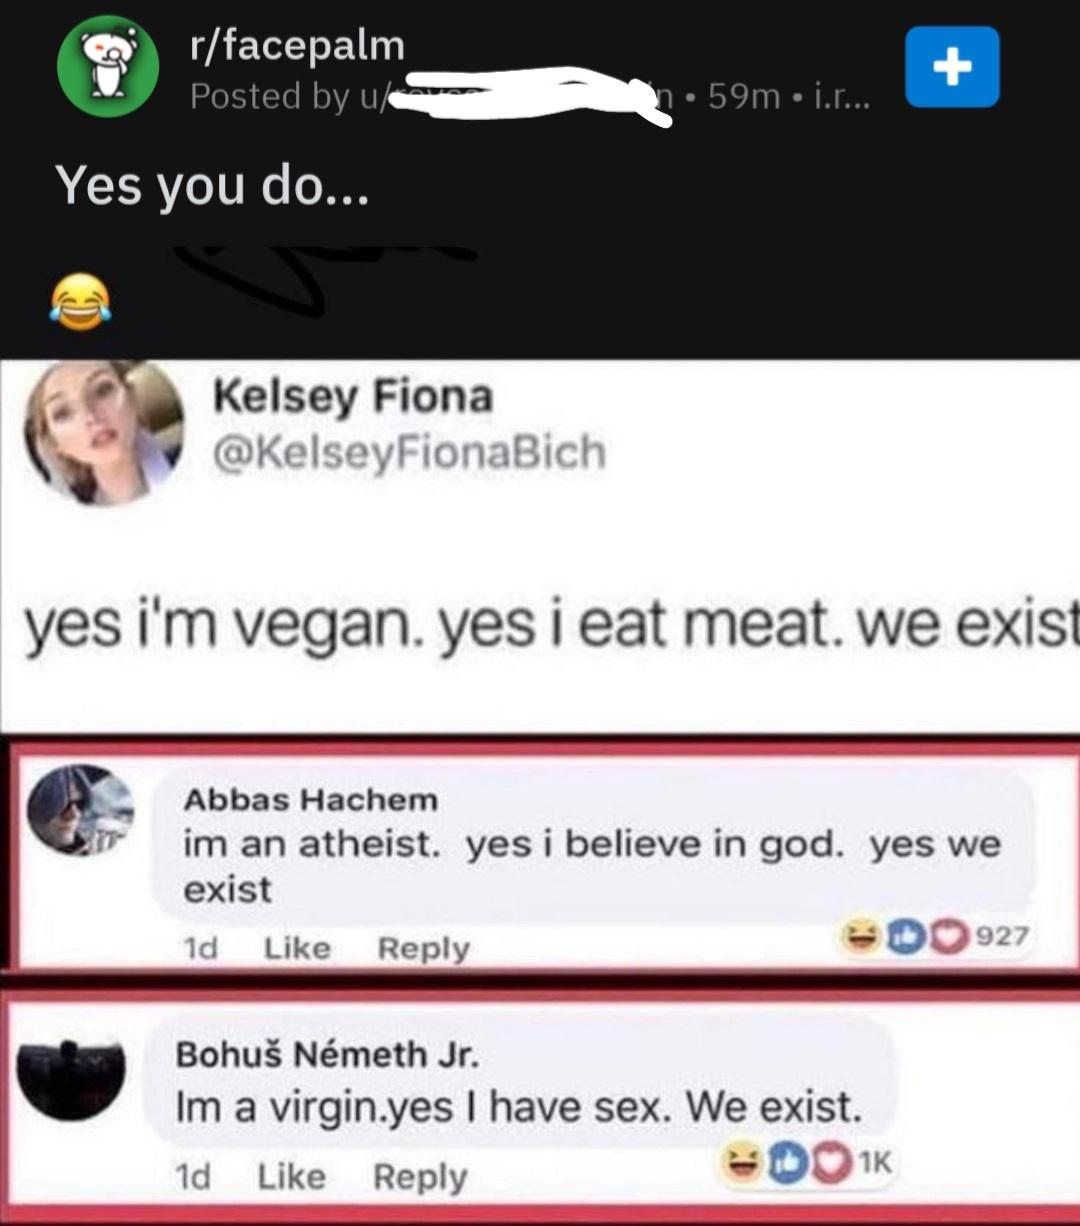 missed - yes we exist meme - rfacepalm Posted by us 1.59m j.r... Yes you do... Kelsey Fiona yes i'm vegan. yes i eat meat. we exist Abbas Hachem im an atheist. yes i believe in god. yes we exist 1d 0927 Bohu Nmeth Jr. Im a virgin.yes I have sex. We exist.